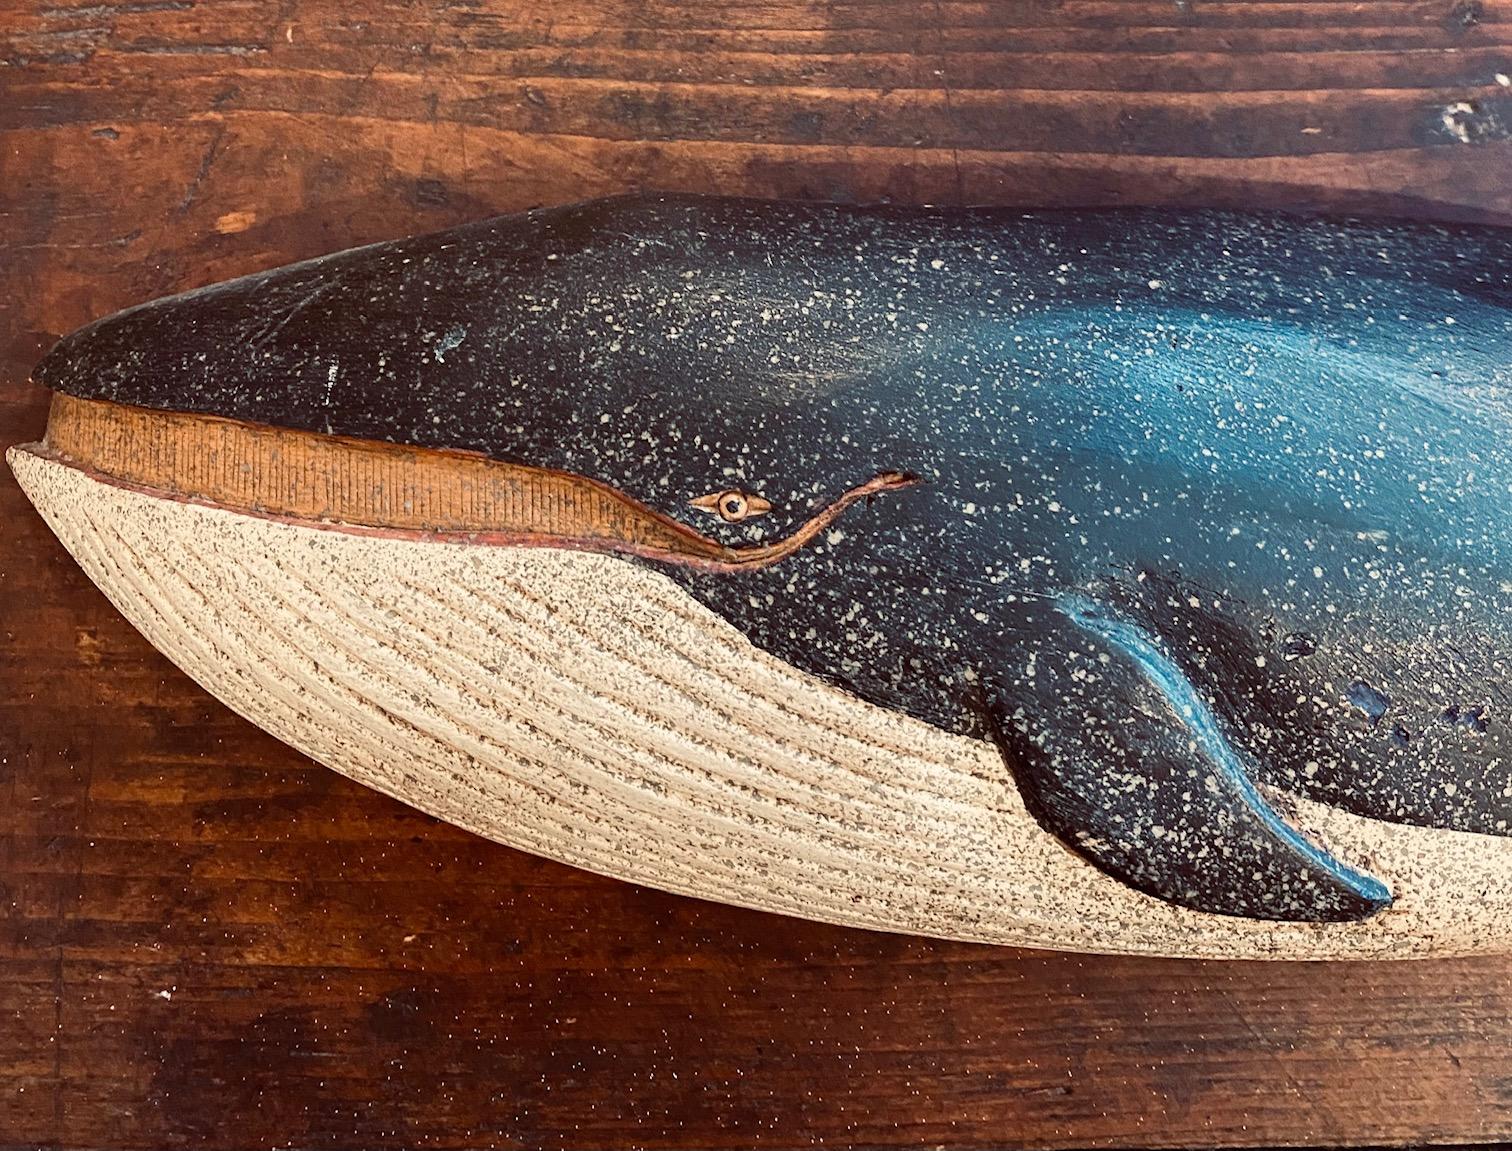 Carved and decorated finback whale plaque by Clark Voorhees (1911 - 1980), circa 1960, carved quarter round figure of a whale in fine original painted surface, signed by stamp on the reverse.

Measures: 4-1/4 in H x 18-1/2 in L x 2-1/8 in Deep.